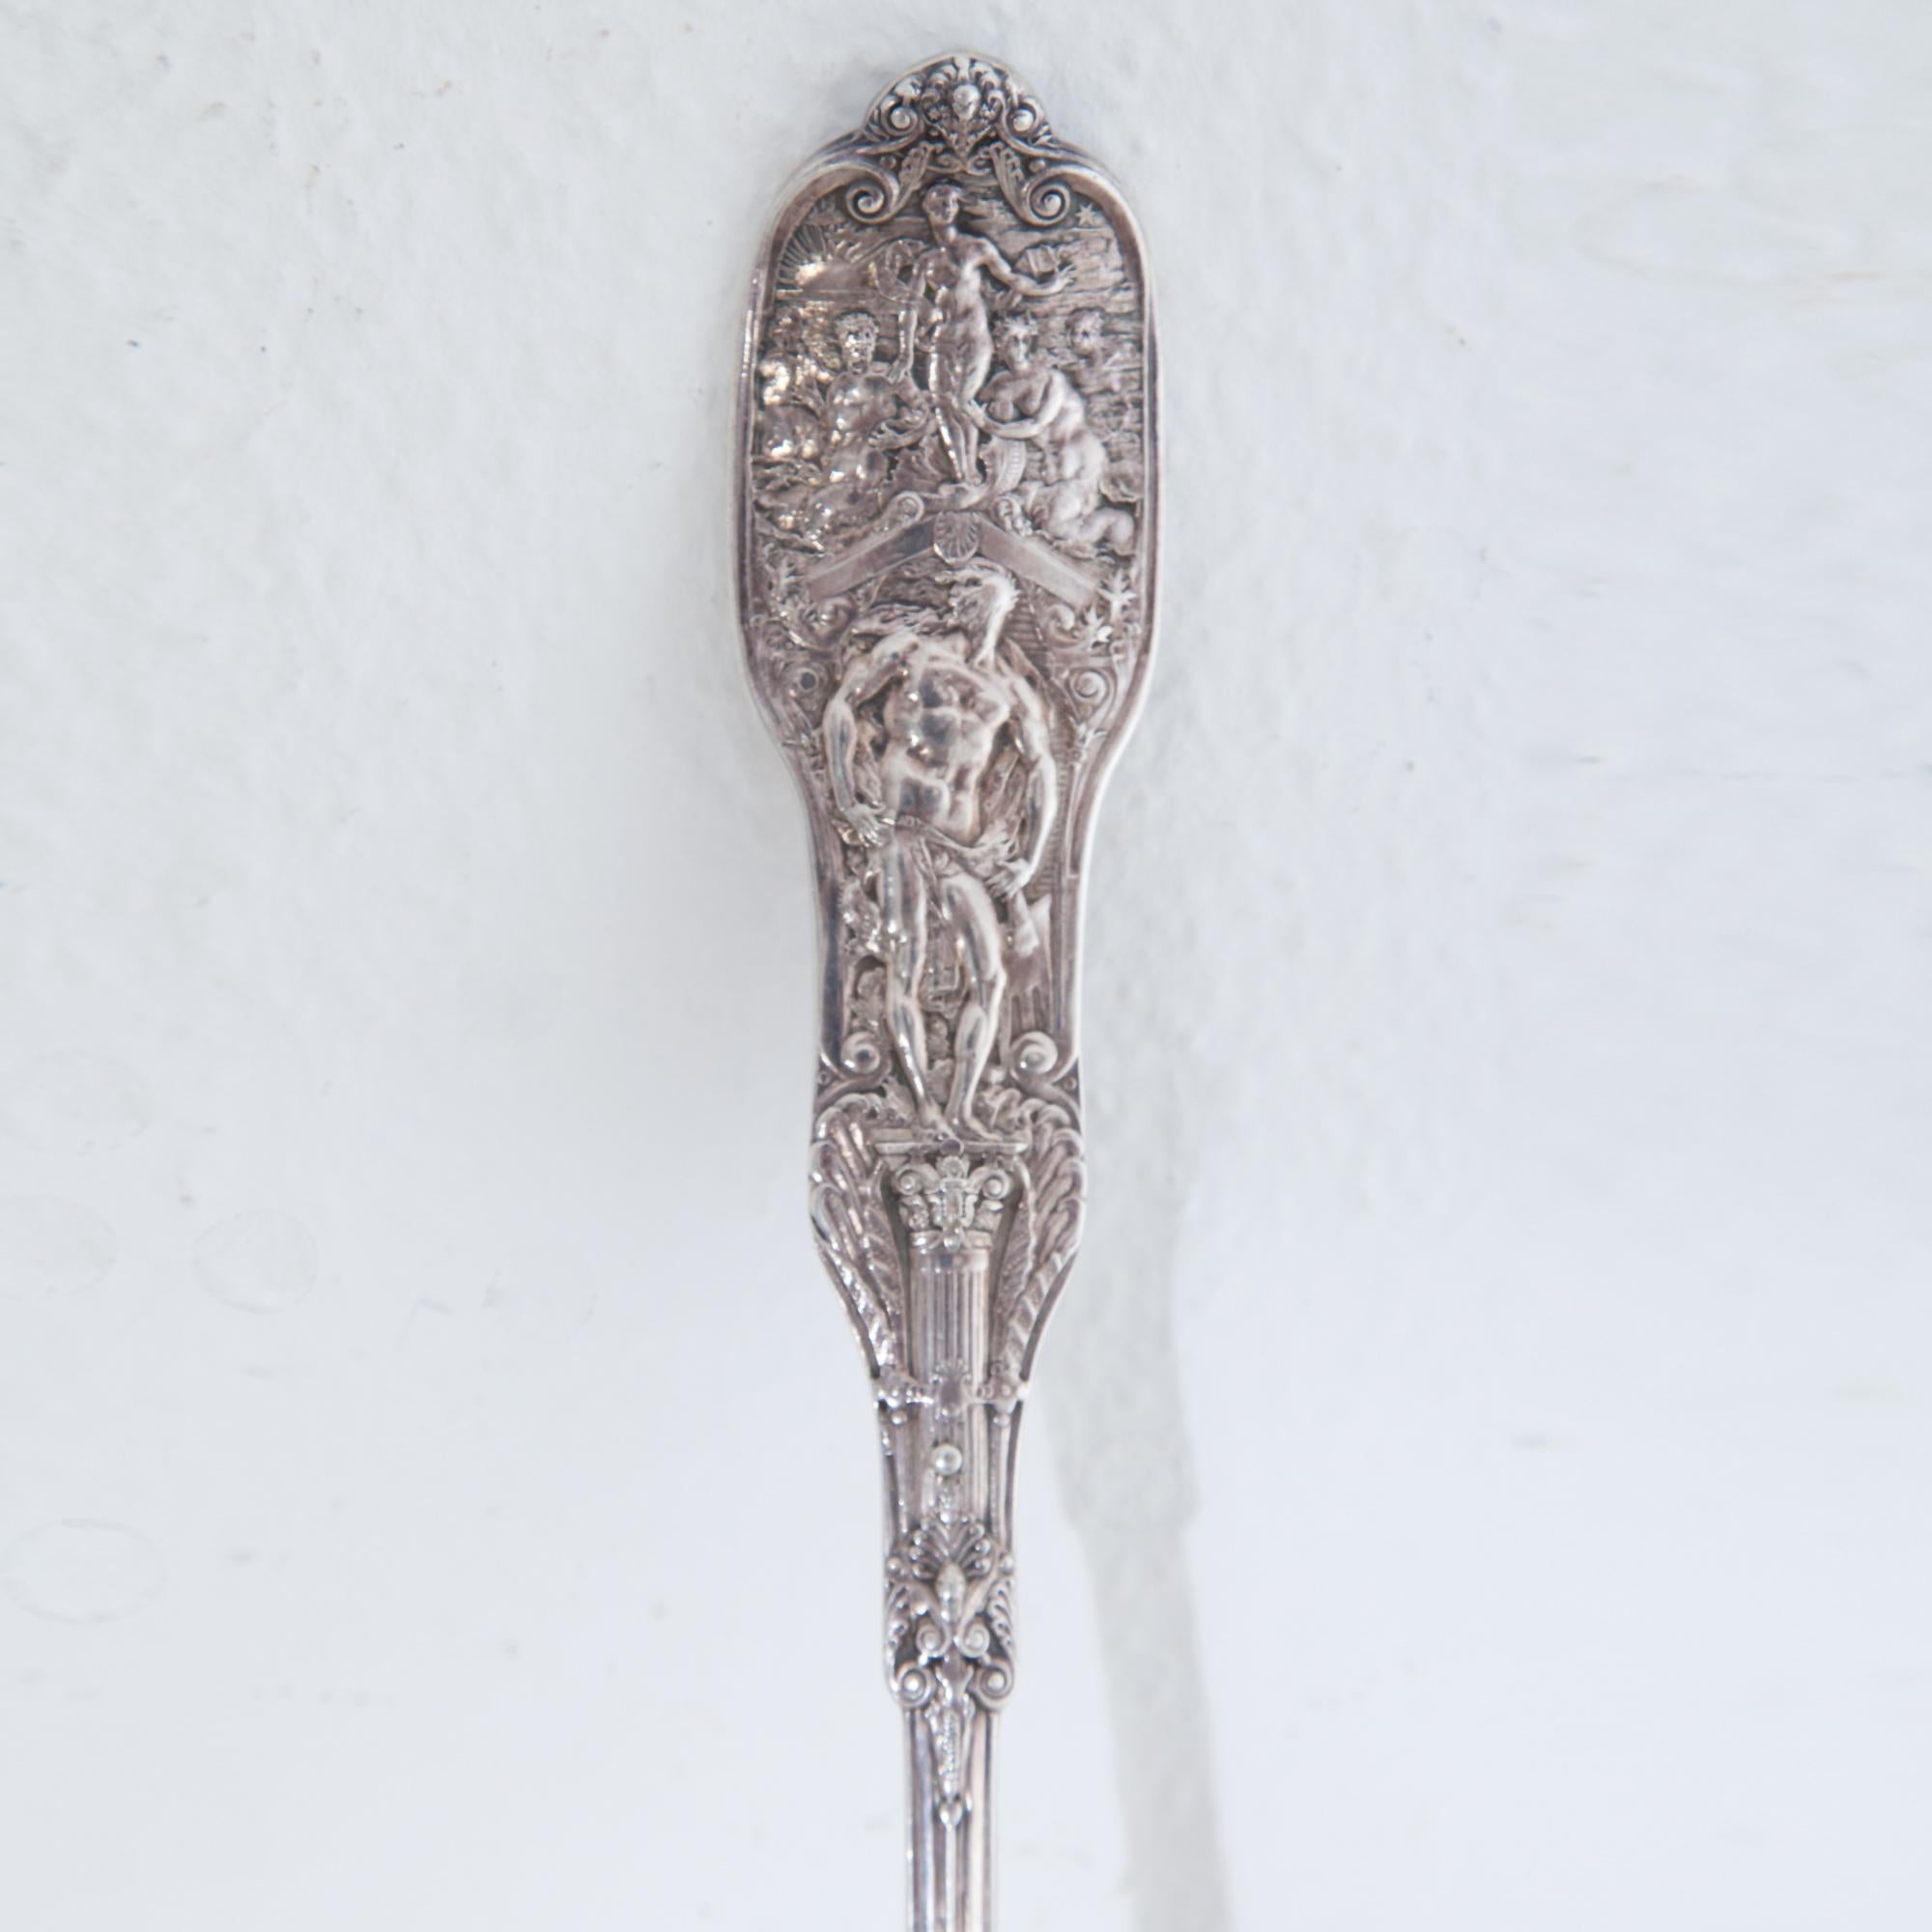 Silver Large Spoon, Spaulding & Co., Chicago Pat, 1895